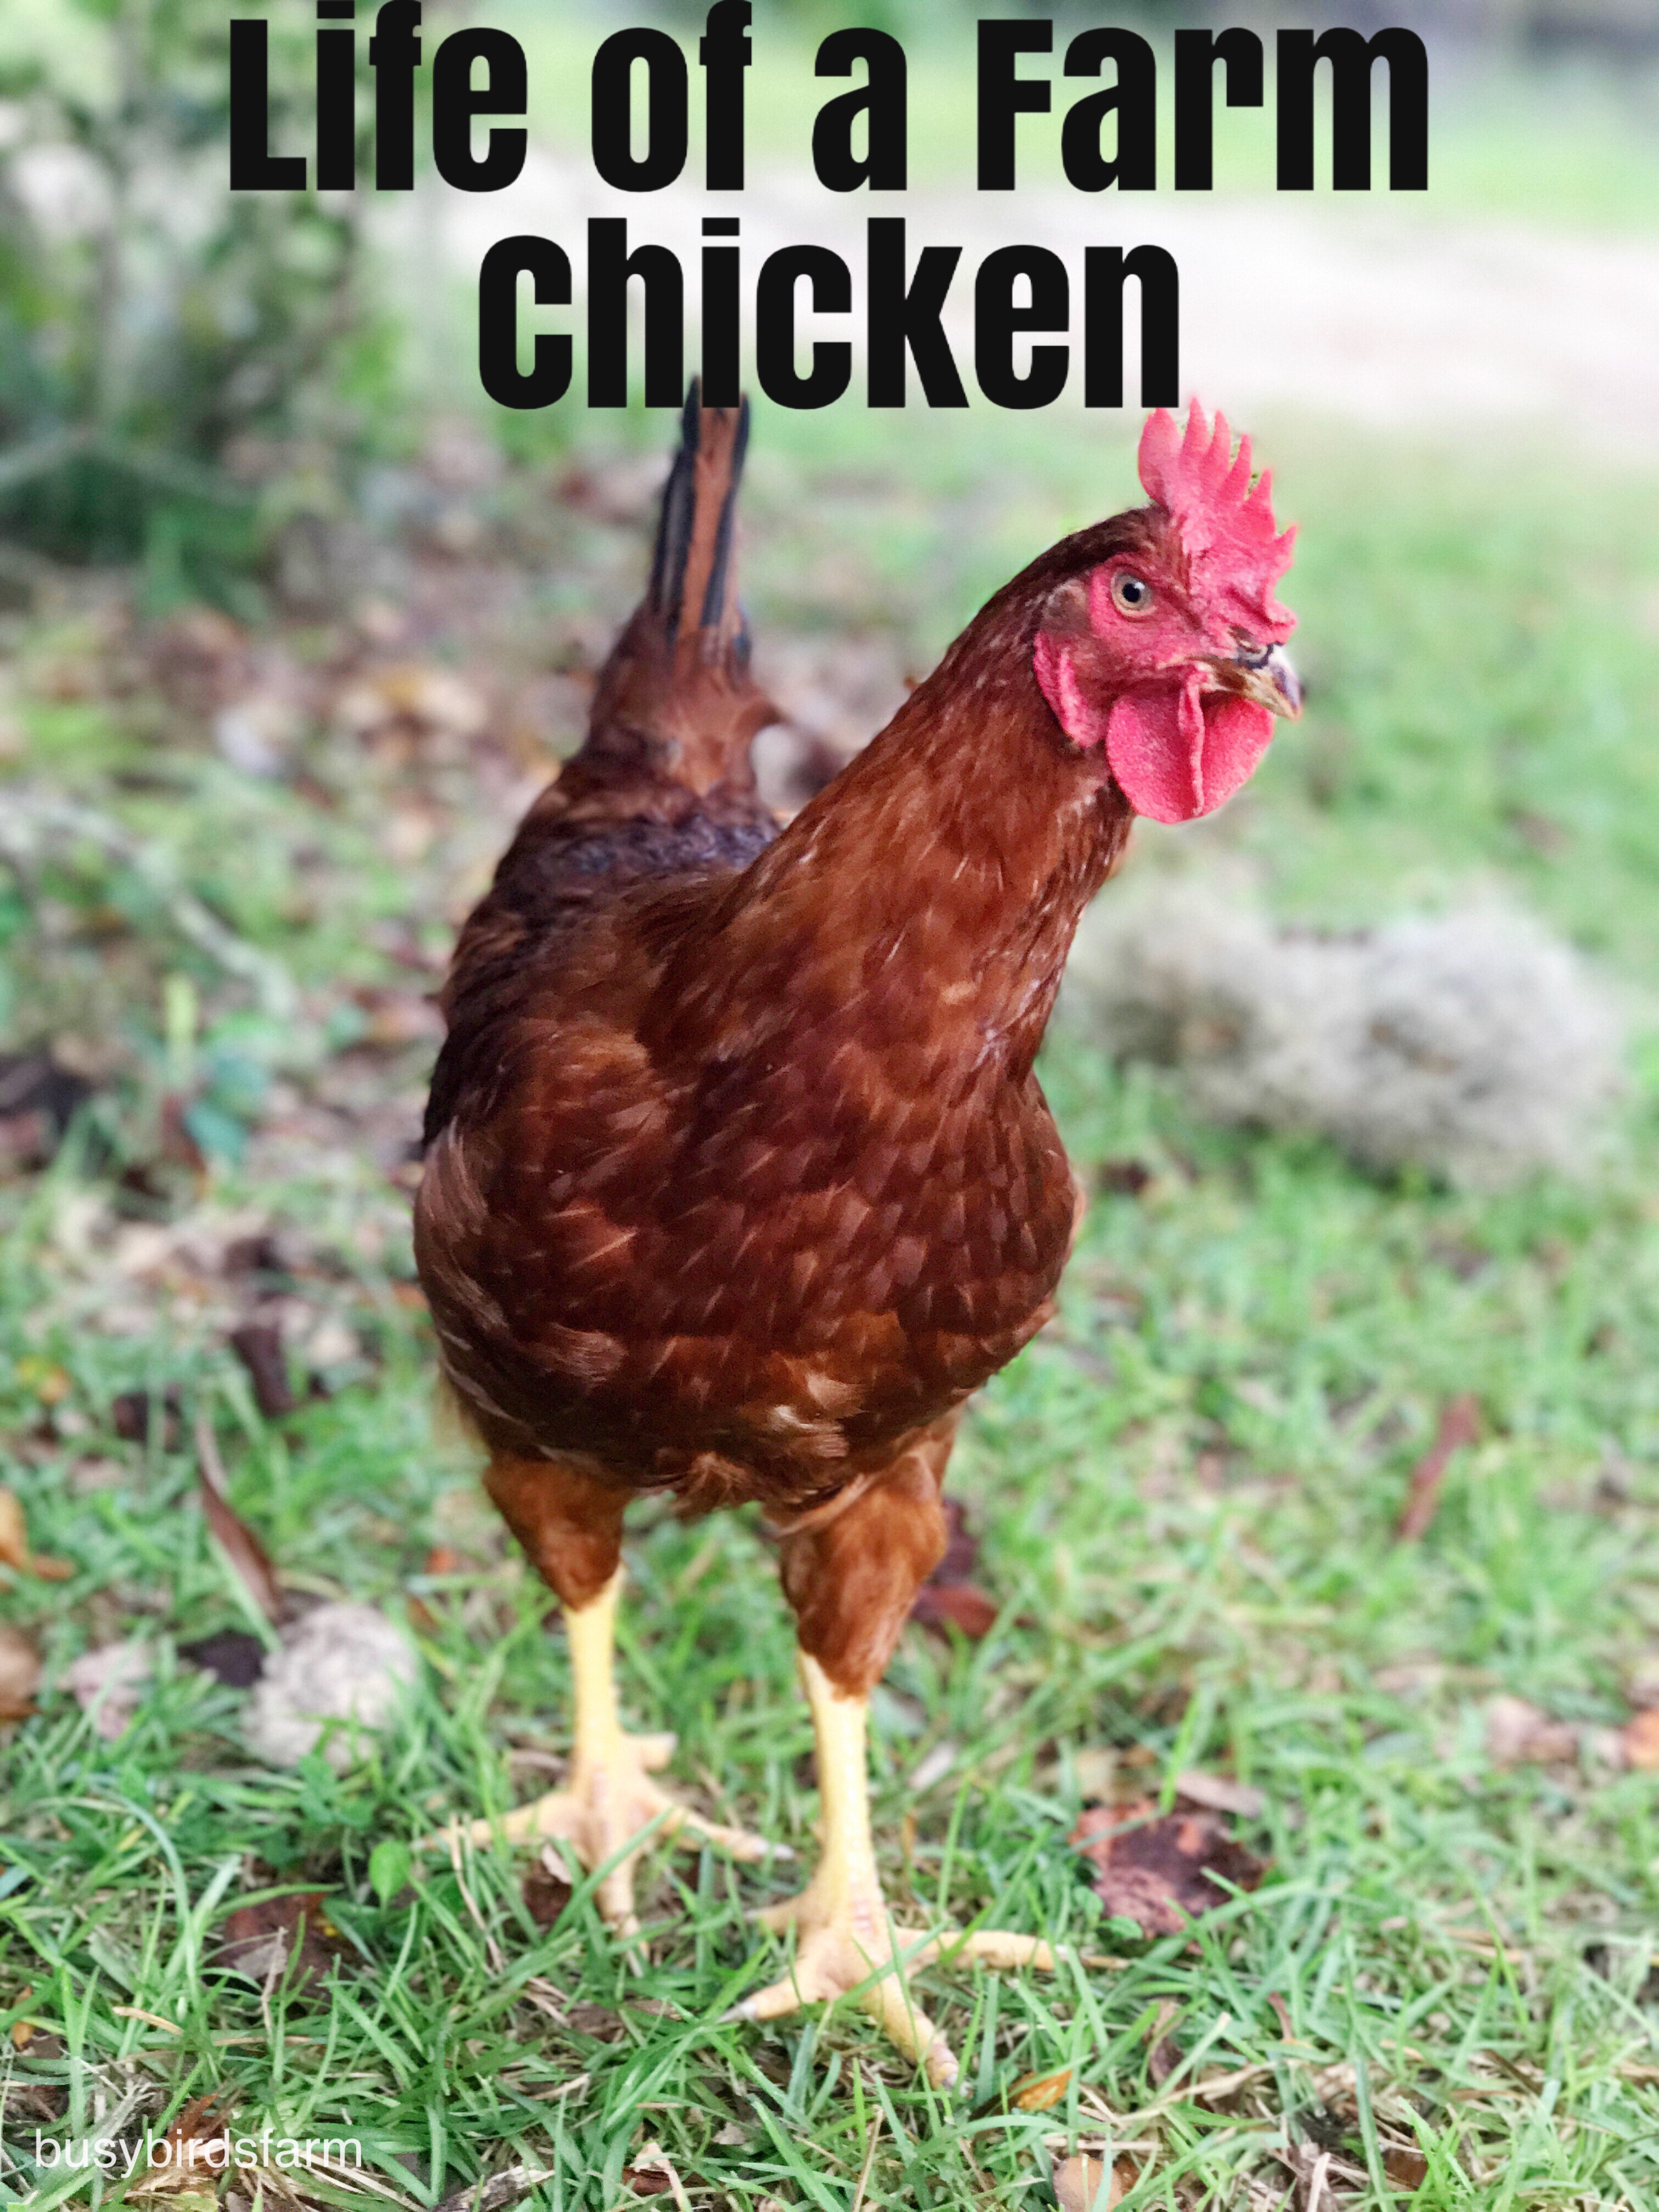 The life of a Farm Chicken